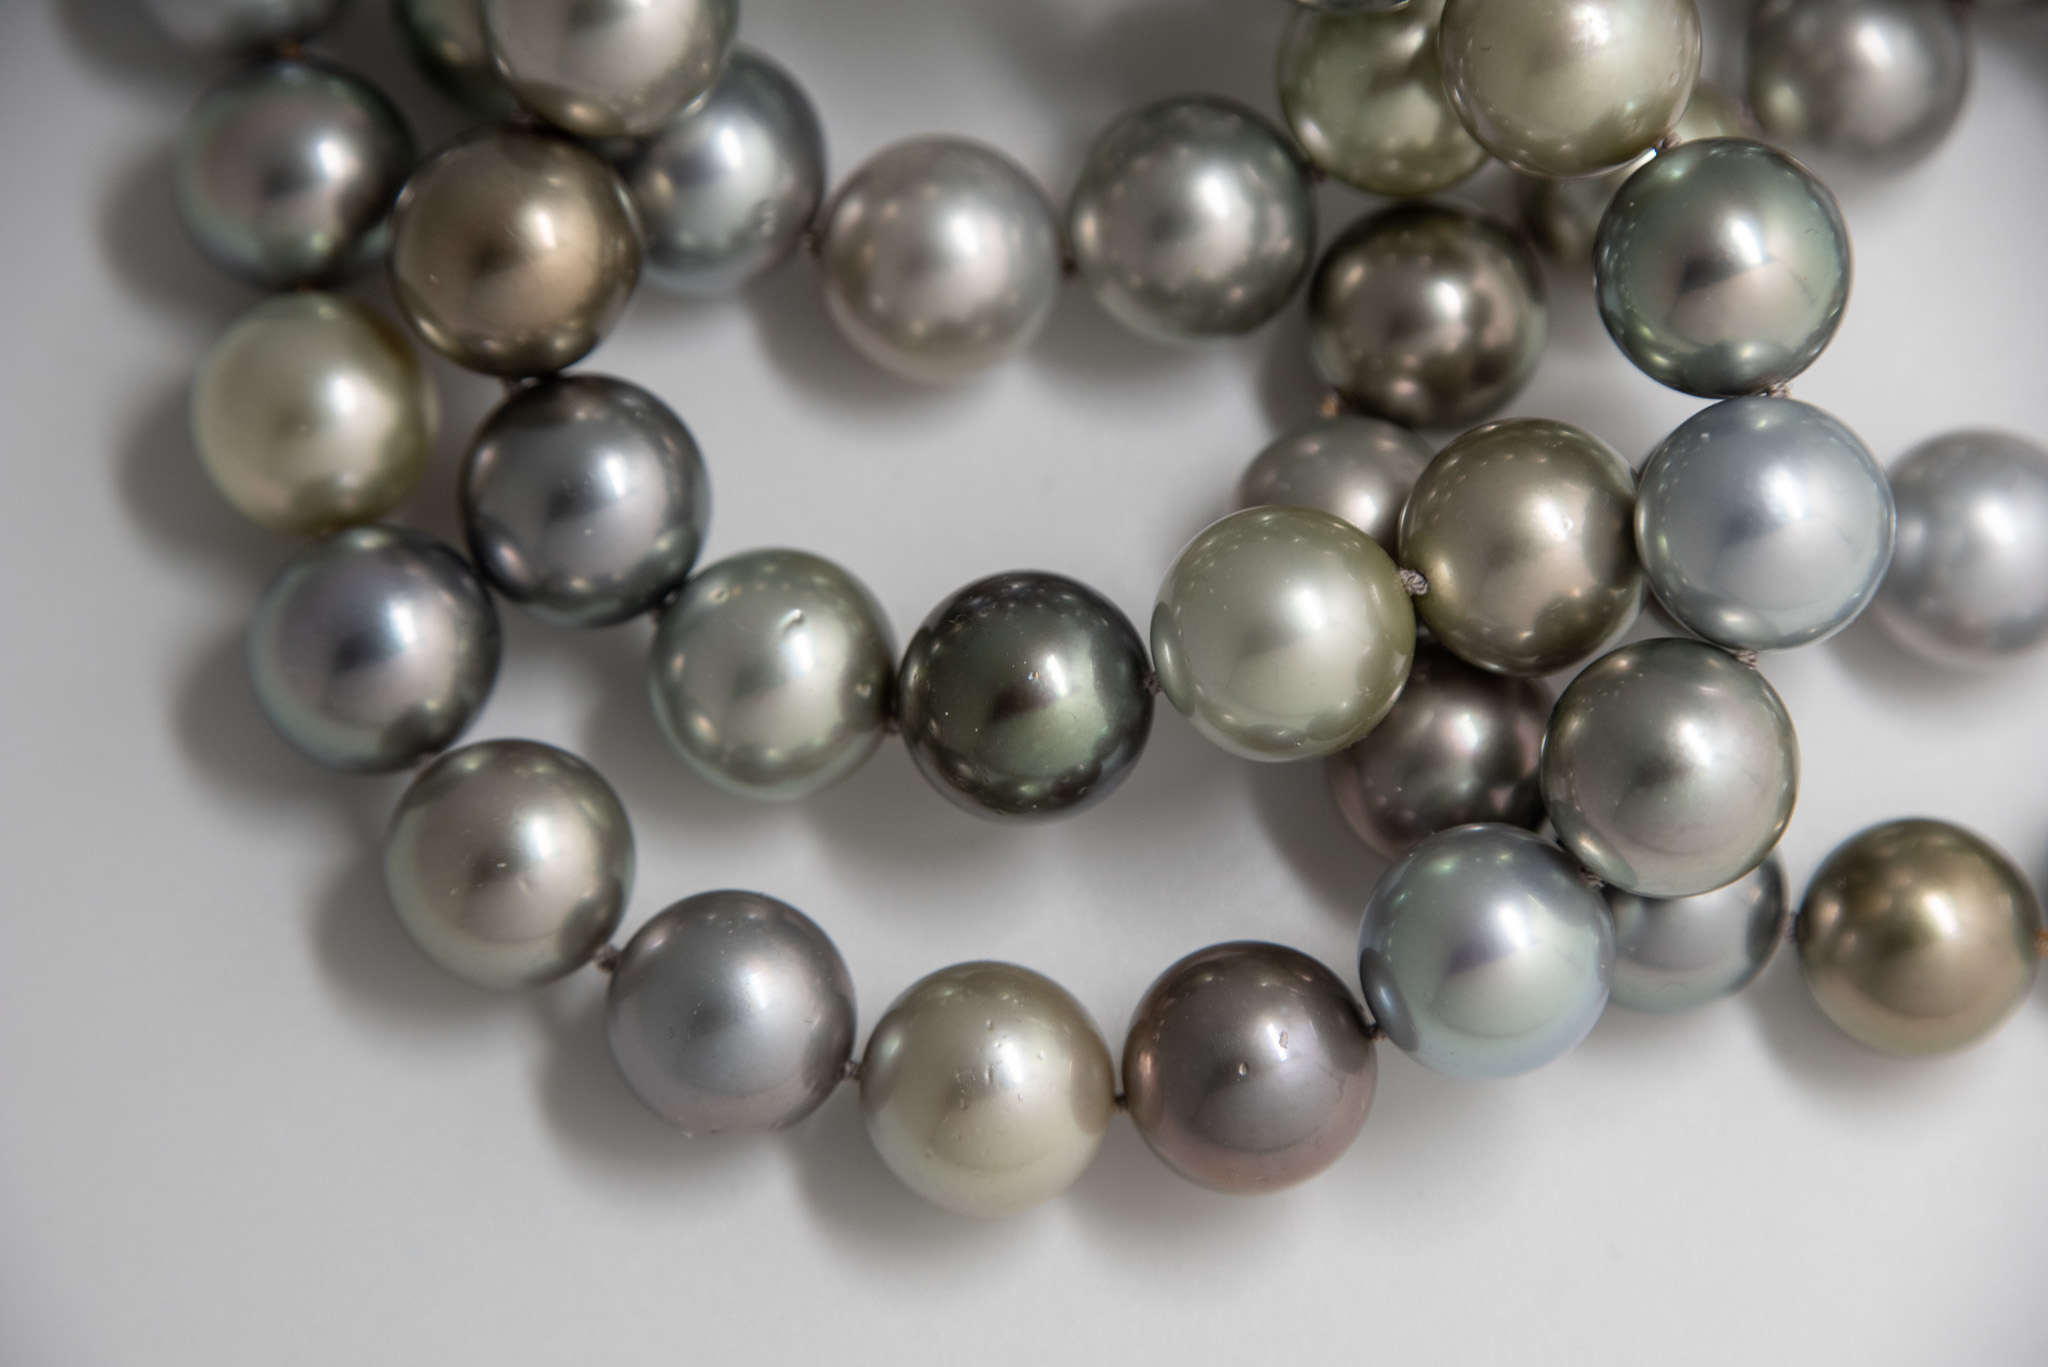 closeup of 12.5mm Tahitian pearls showing hand knotting and color range